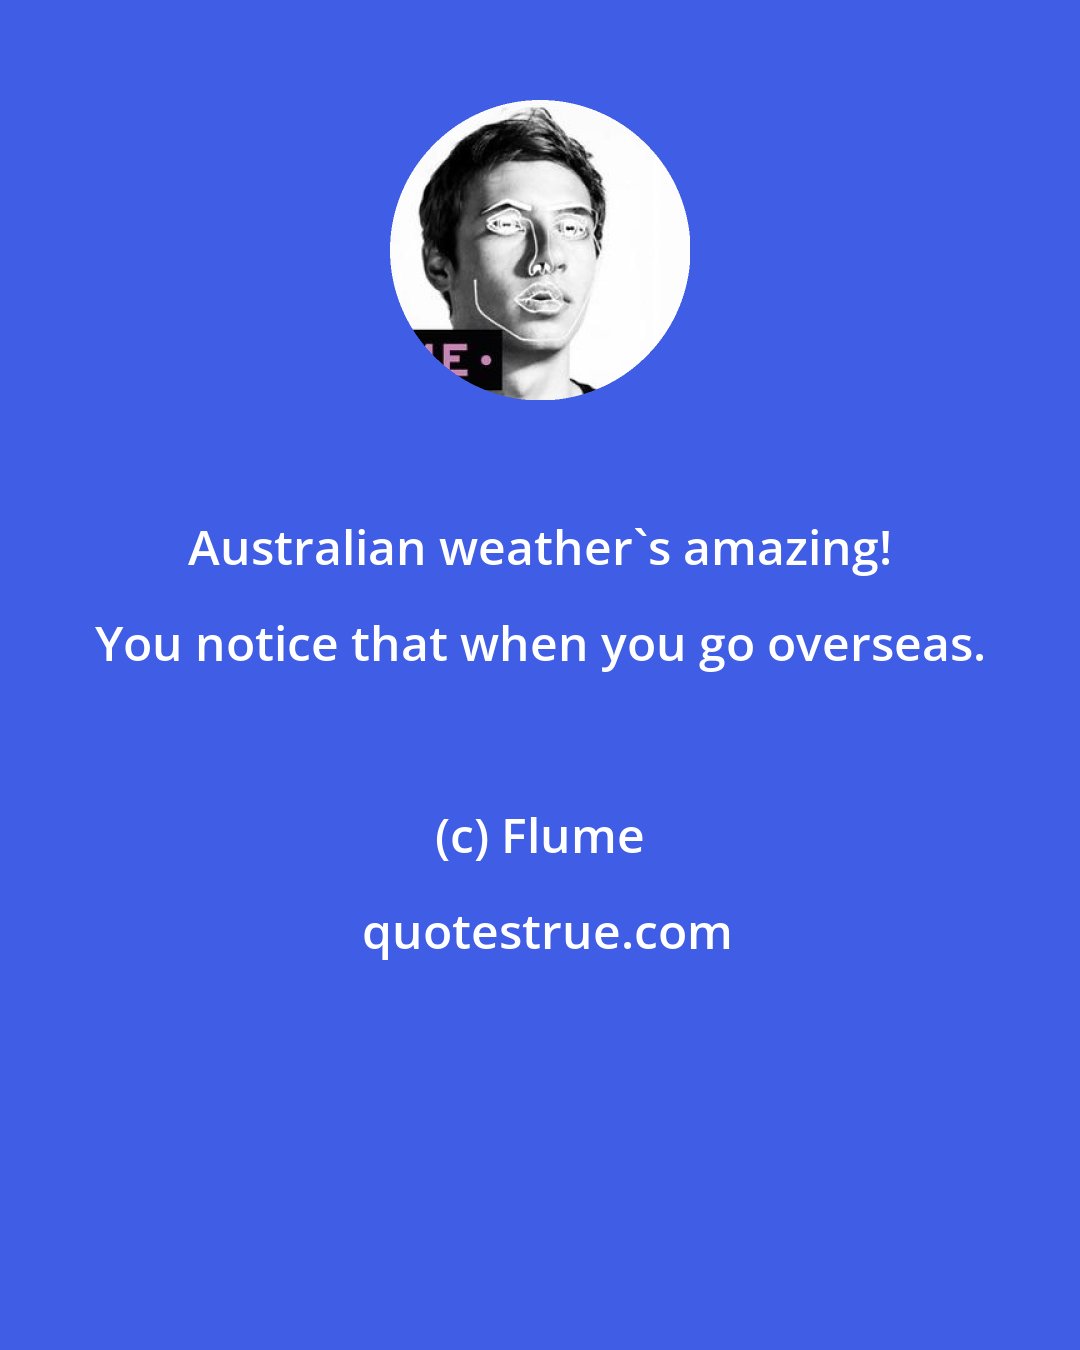 Flume: Australian weather's amazing! You notice that when you go overseas.